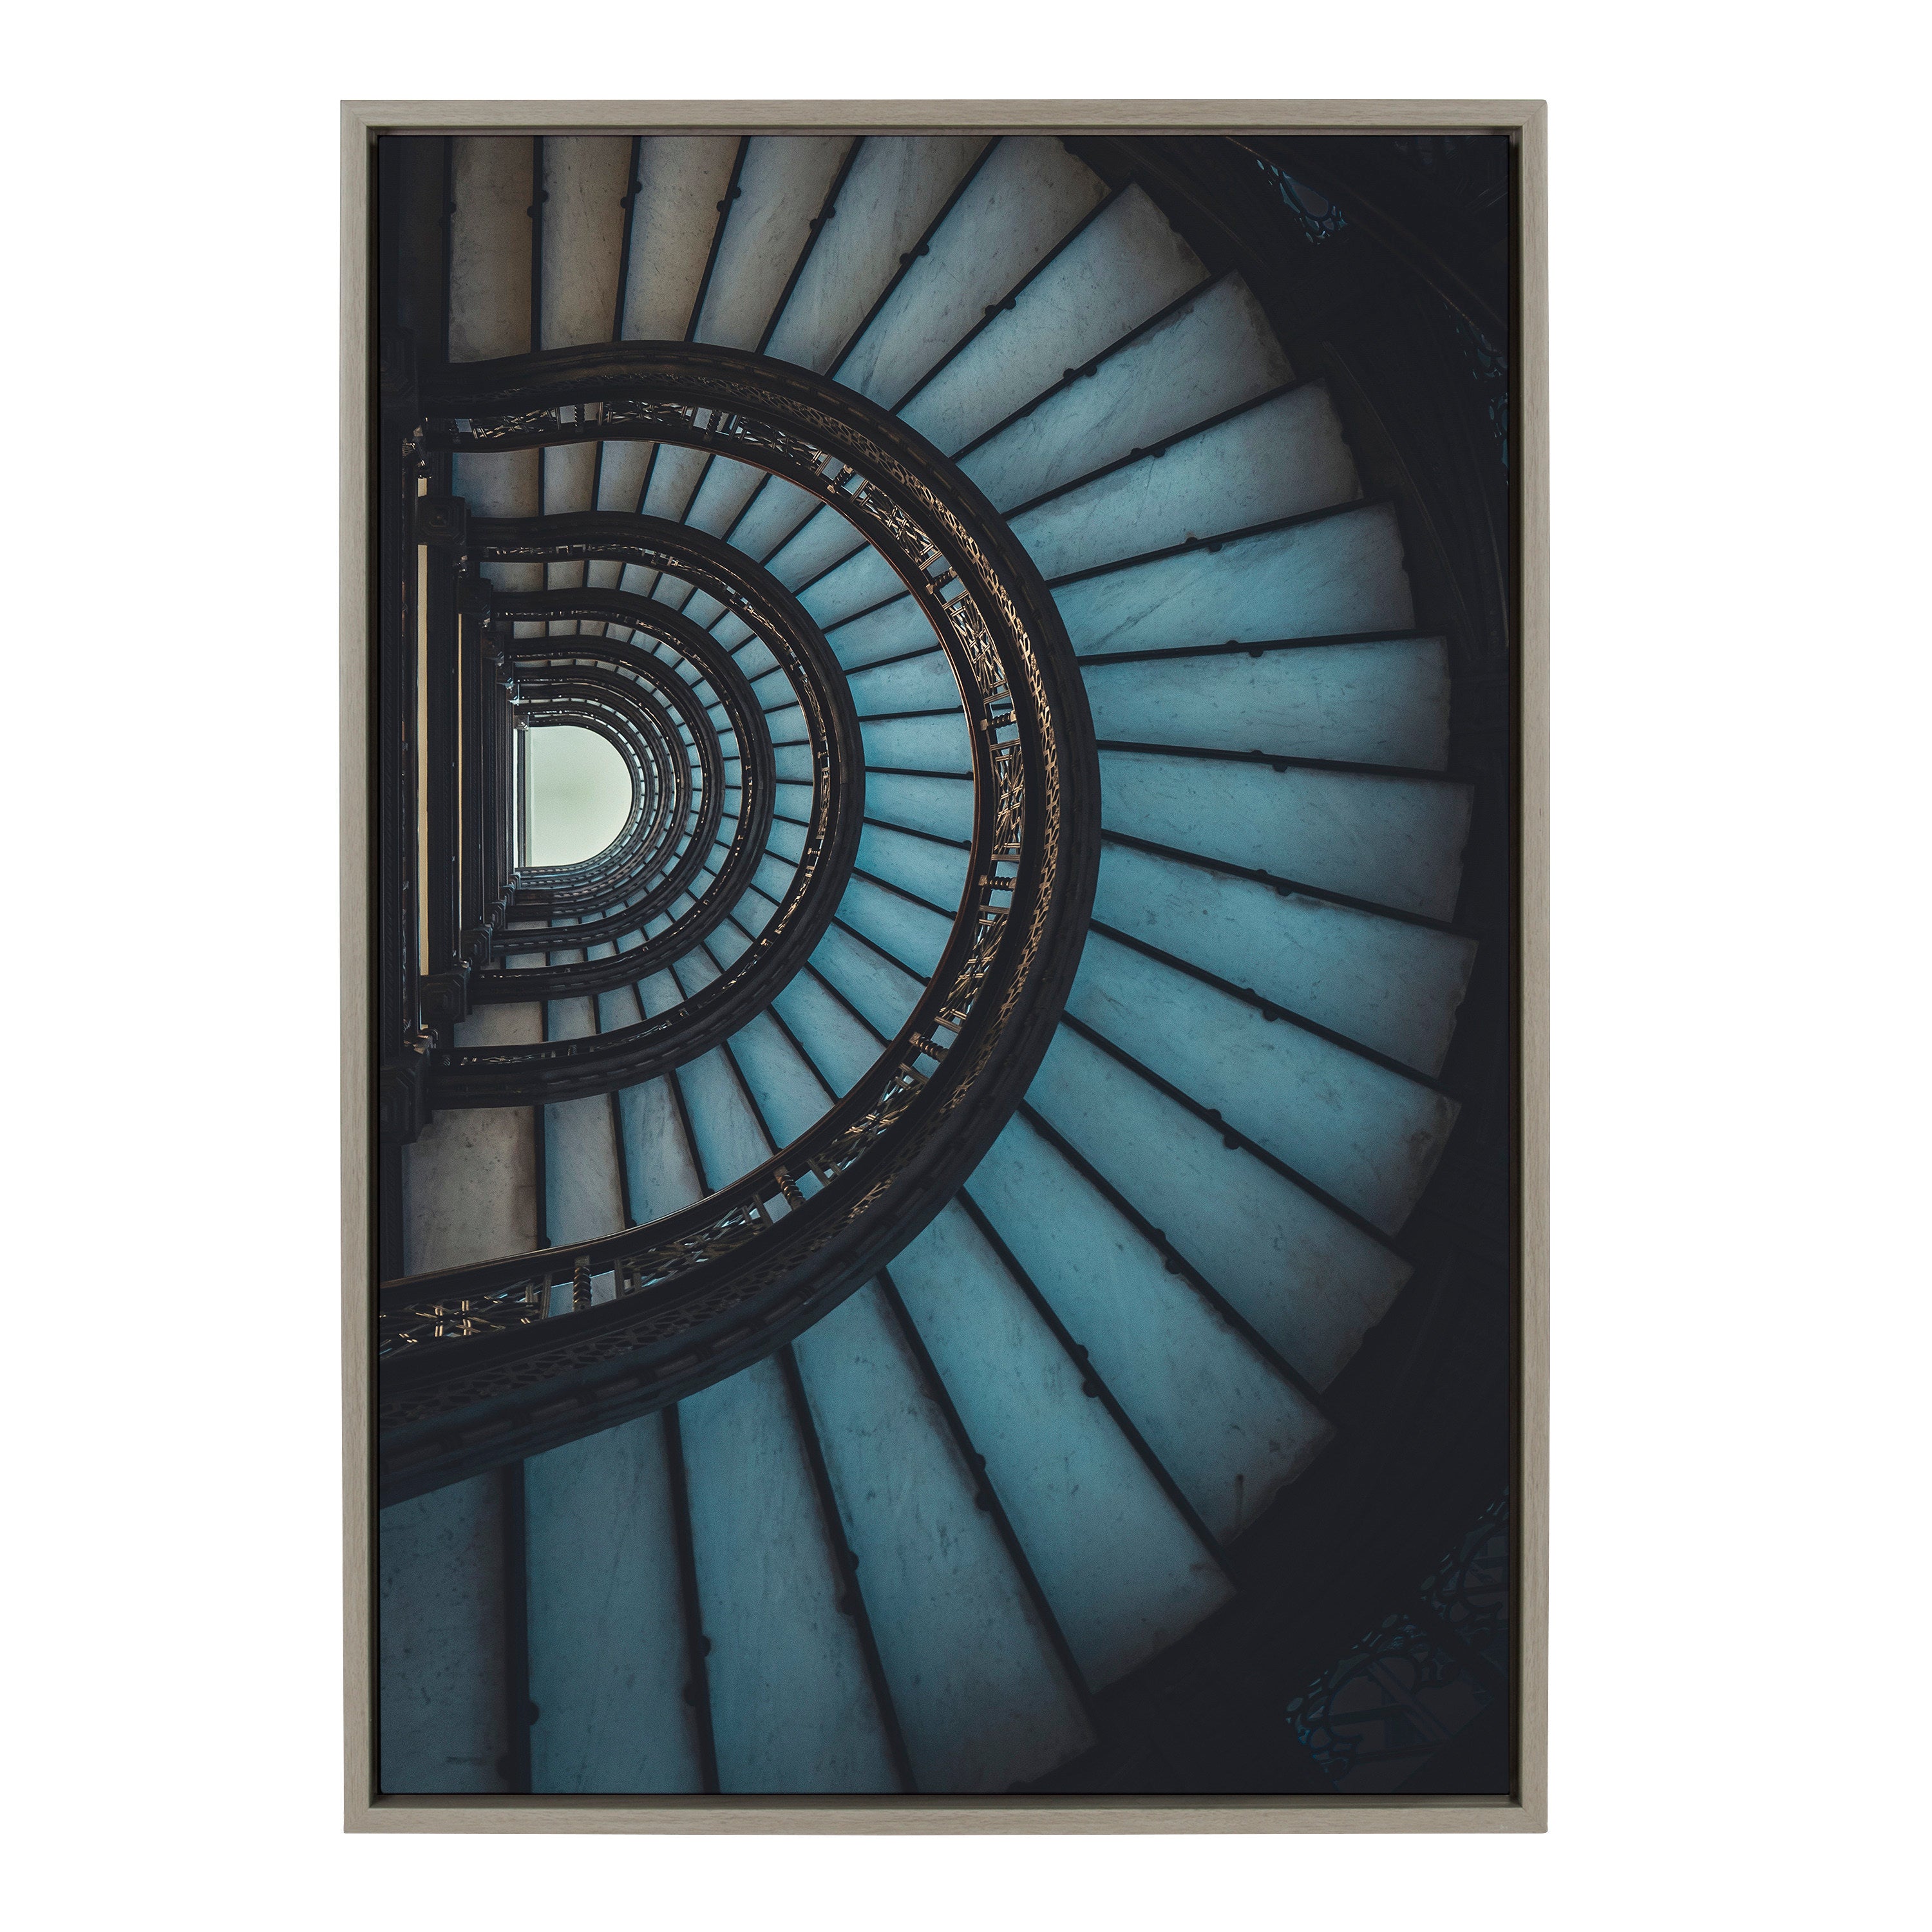 Sylvie Blue Stairway Framed Canvas by Emiko and Mark Franzen of F2Images